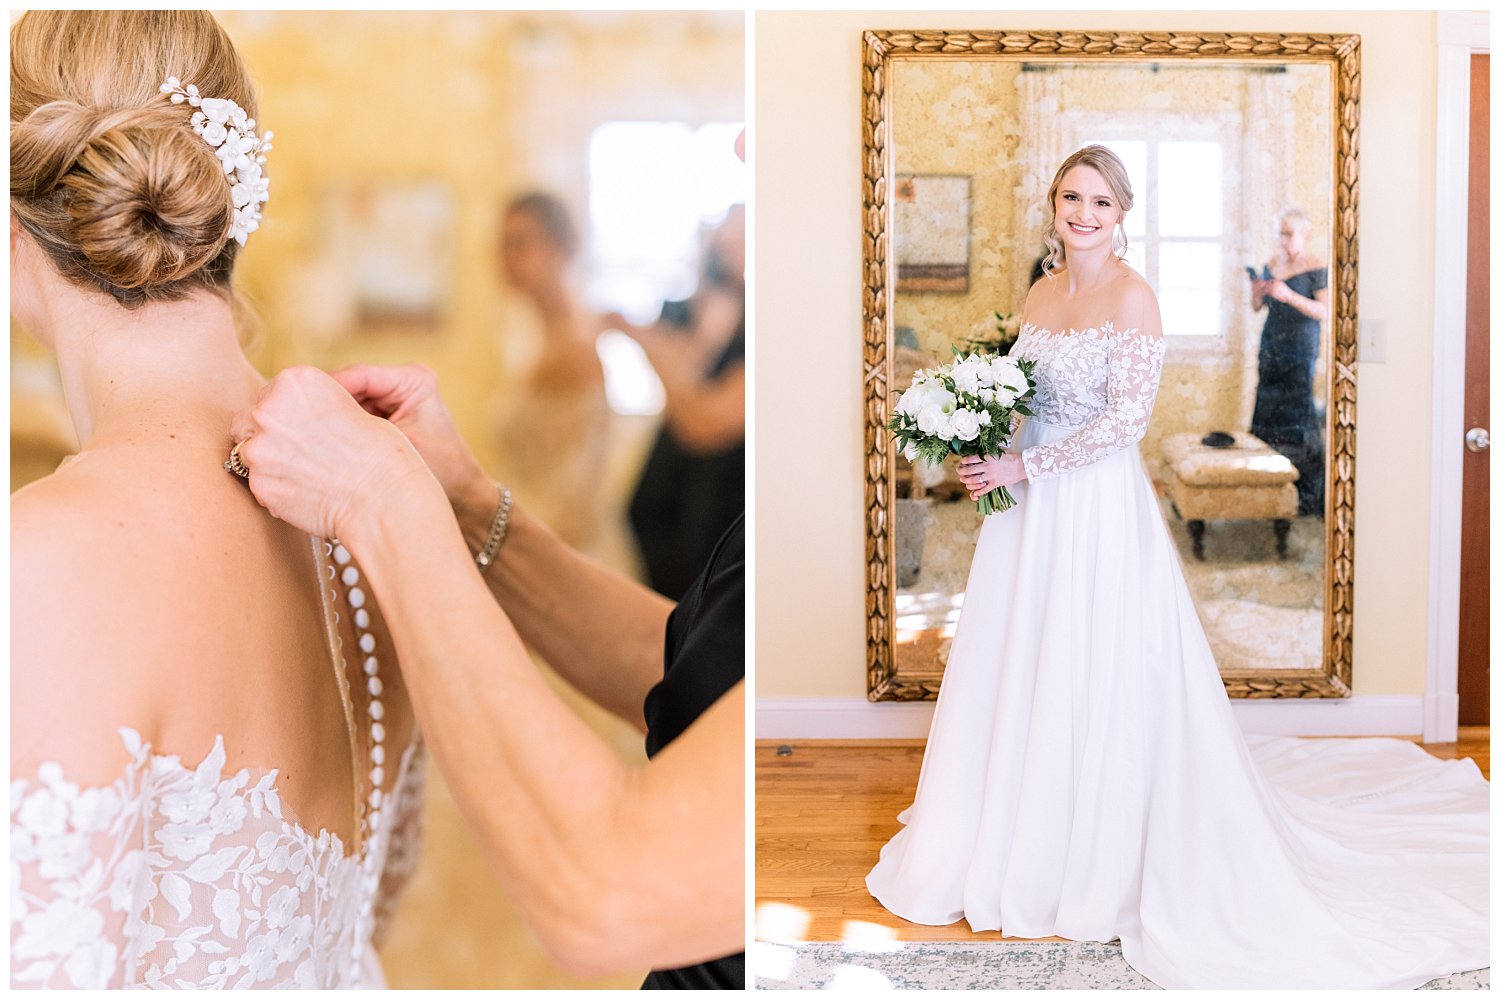 Bridal portraits in the cottage at Early Mountain Vineyard in Charlottesville, Virginia